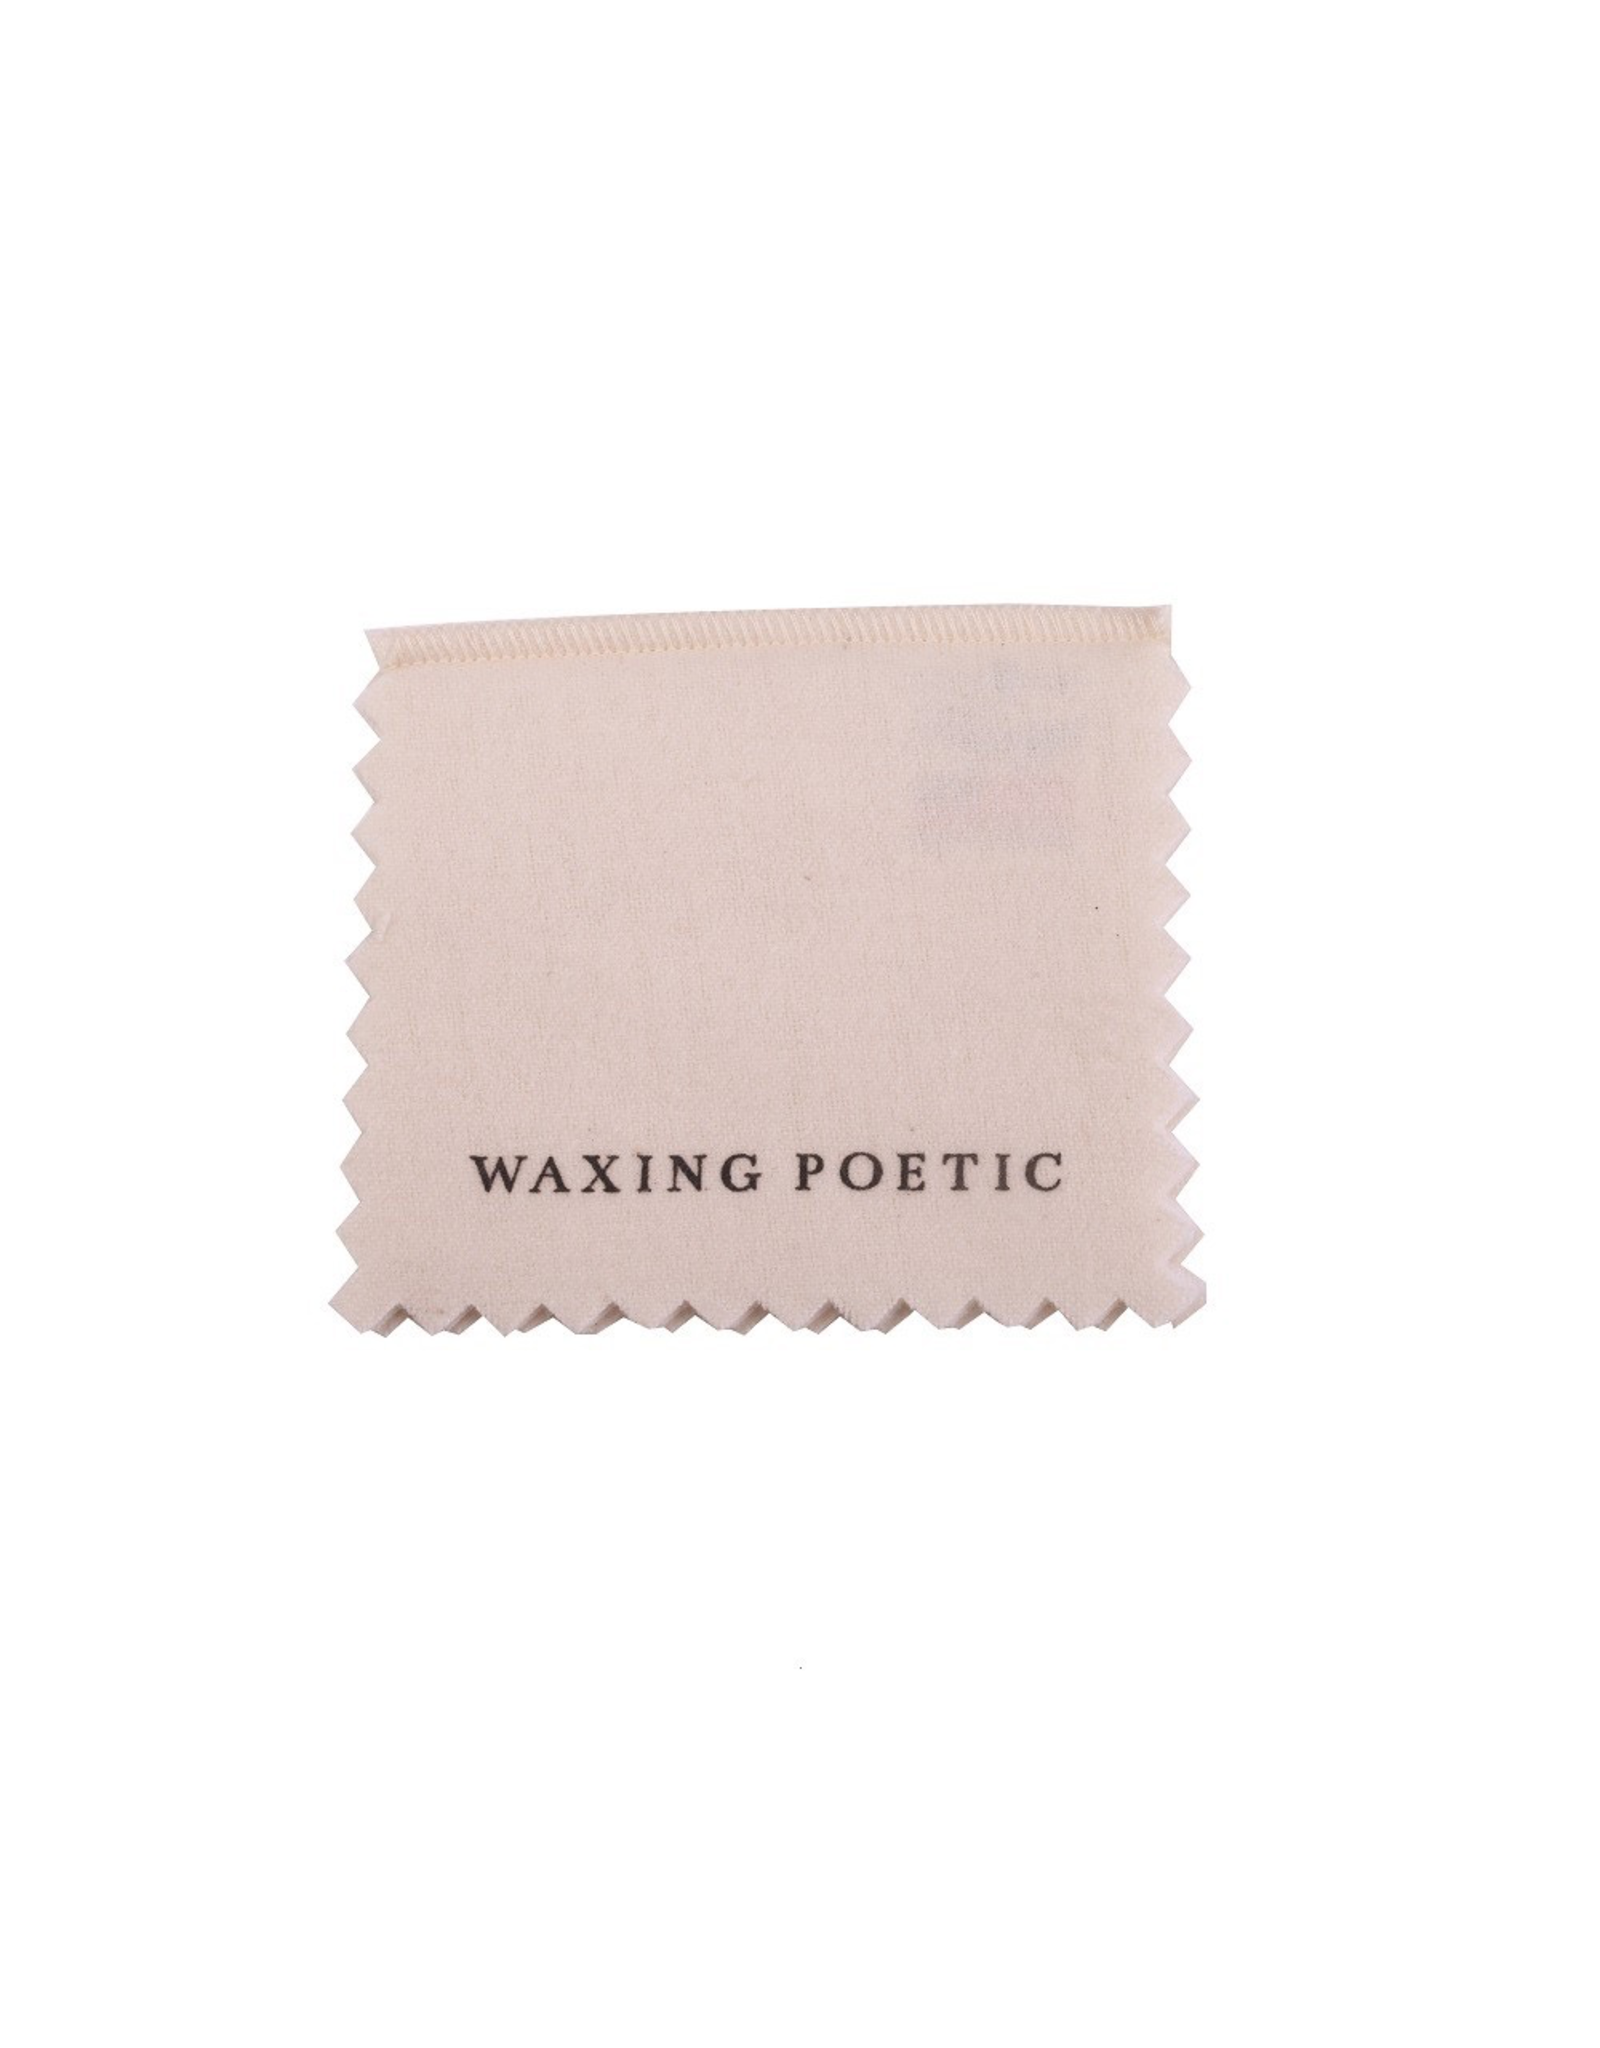 Waxing Poetic® Jewelry Waxing Poetic Jewelry Polishing Cloth by Hagerty